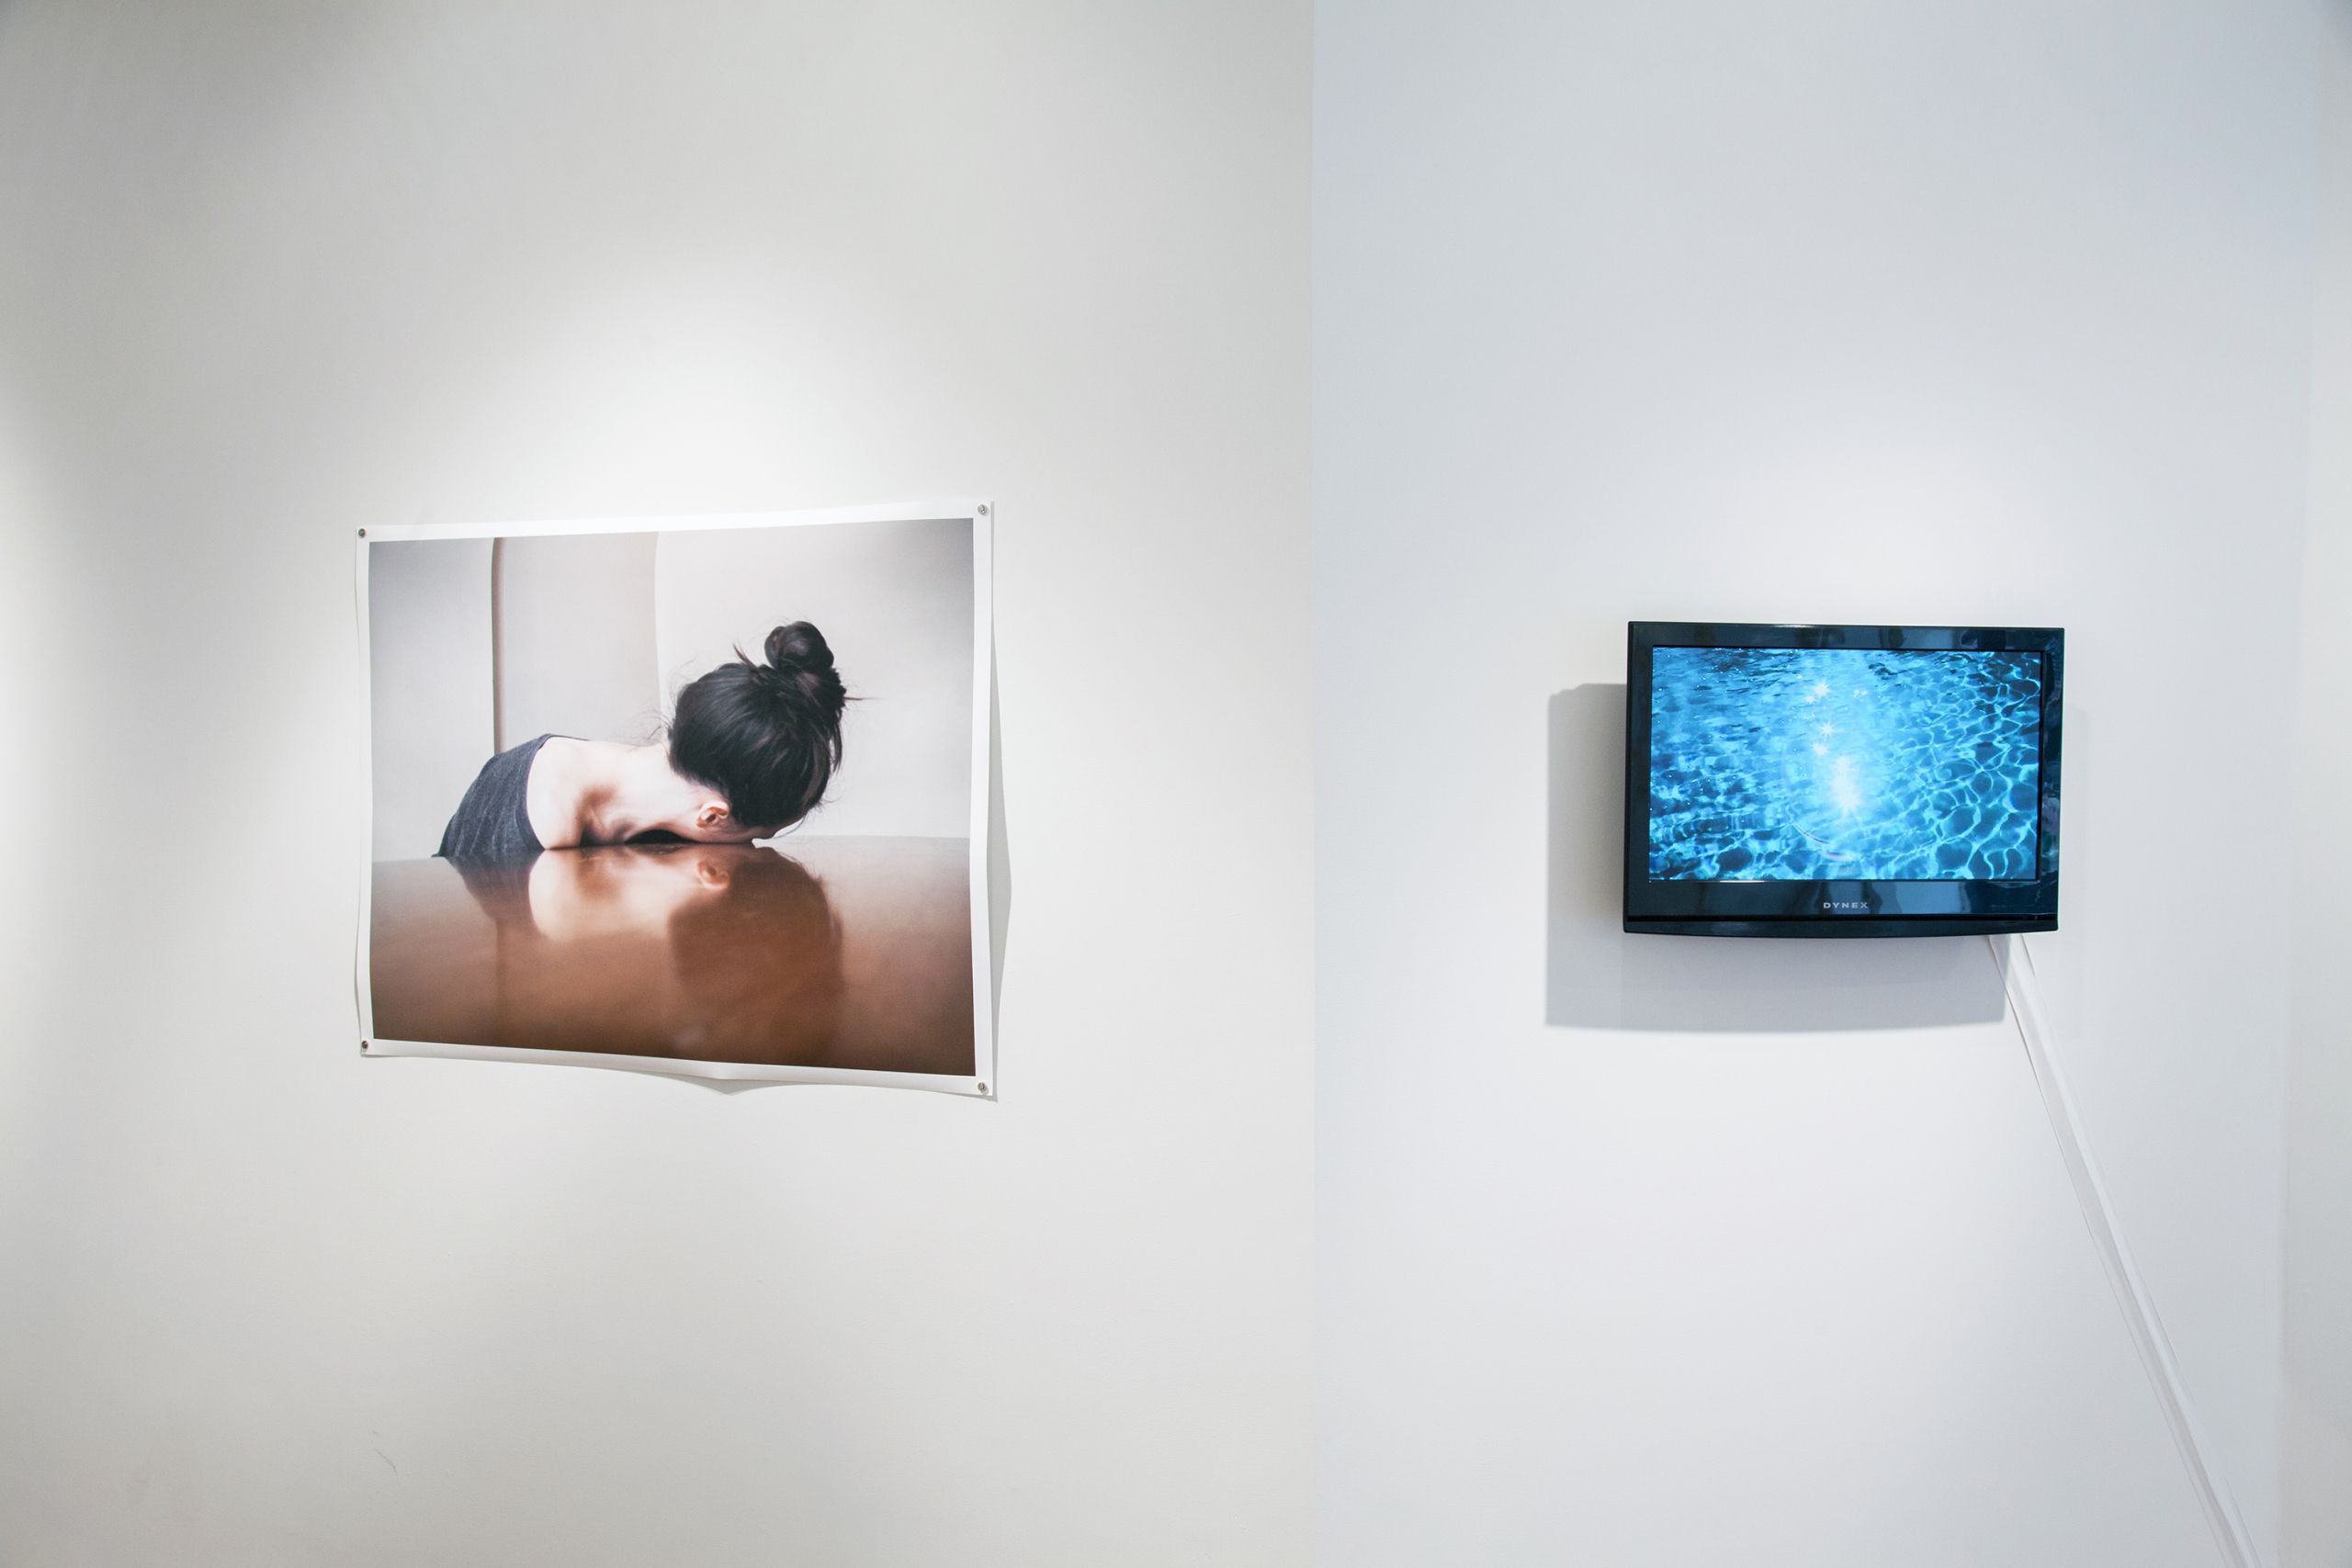 Installation view of <em>The Three Traumas</em> 2015 exhibition at the Camera Club of NY/Baxter St, curated by Jorge Alberto Perez.